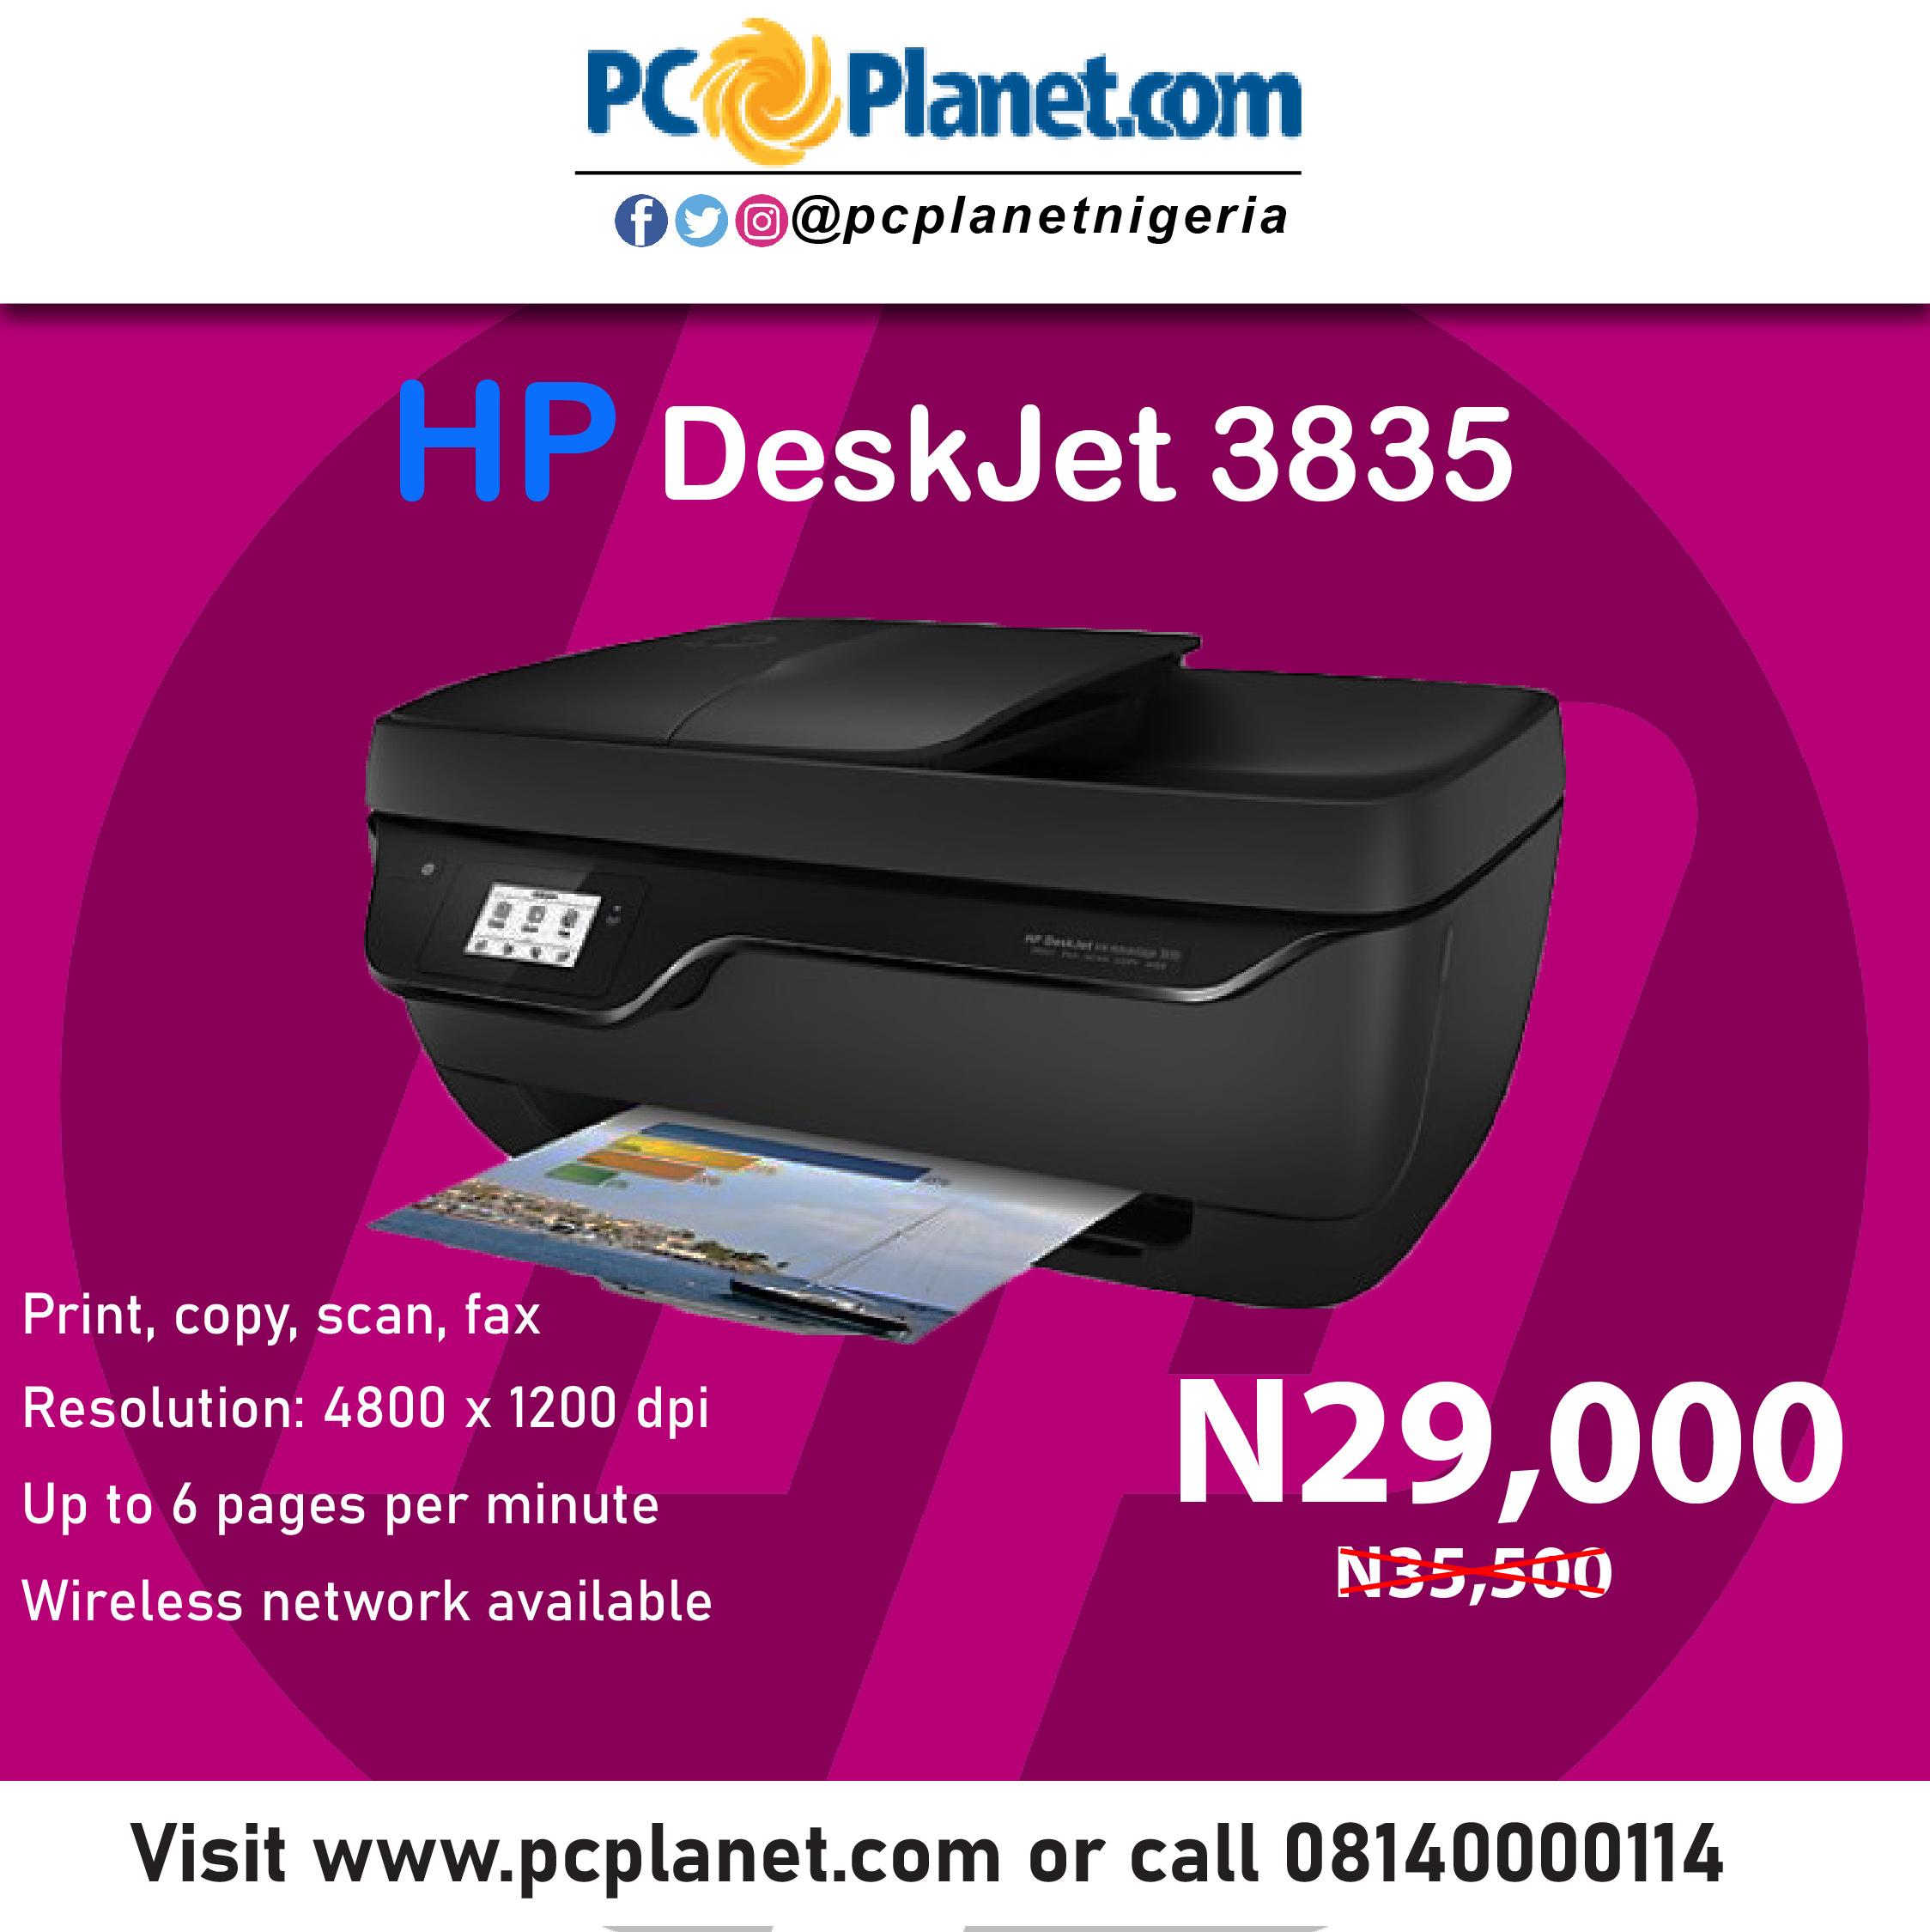 Northern absorberende At lyve PCPlanet.com on Twitter: "Printing made easy with the #HP DeskJet 3835.  Shop now! Call: 08140000114 https://t.co/QzvpbzGJTV #pcplanetnigeria #phone  #laptop #lenovo #hp3835 #dell #acer #asus #surfacepro #zedair #printer  #apple #iPad #macbook #samsung ...